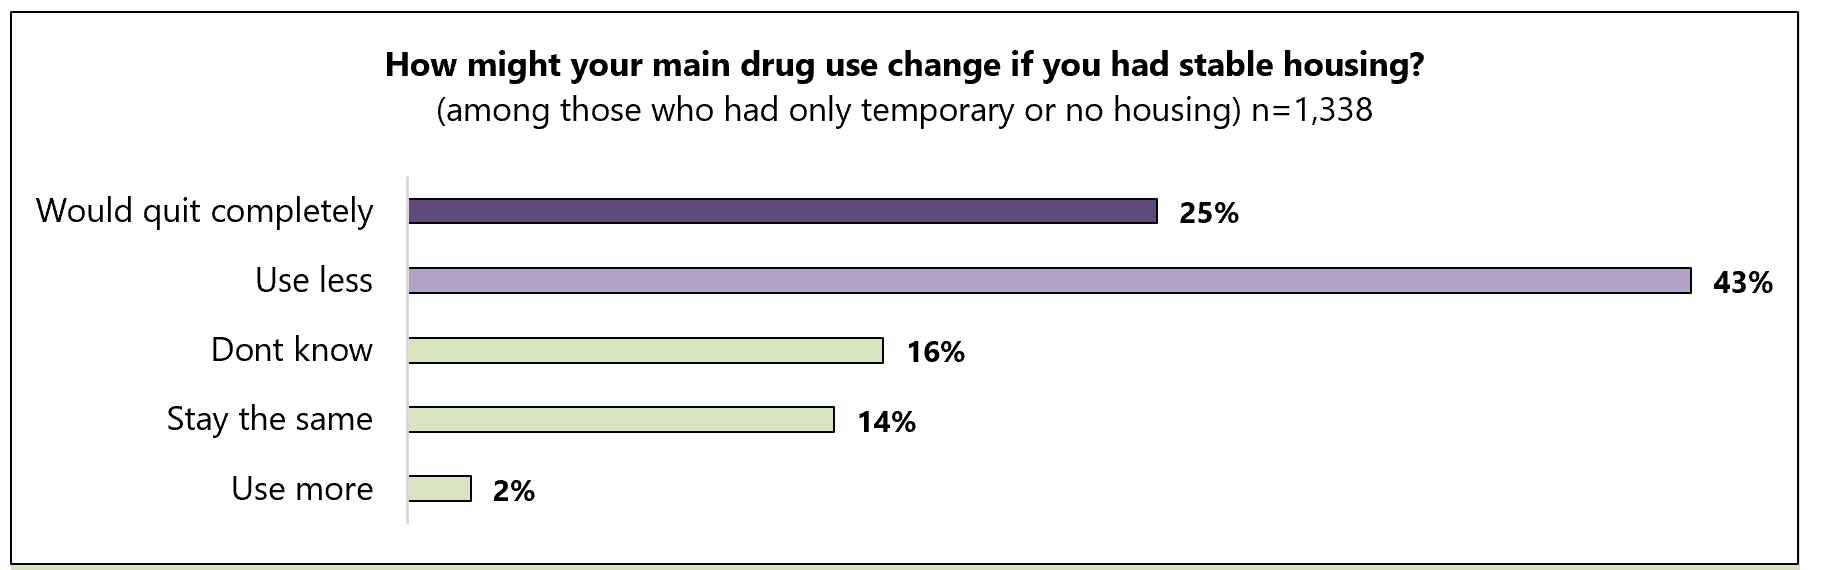 Figure 3: How might your main drug use change if you had stable housing? (among those who had only temporary or no housing, n=1338). Would quit completely: 25%. Use less: 43%. Don't know: 16%. Stay the same: 14%. Use more: 2%. 